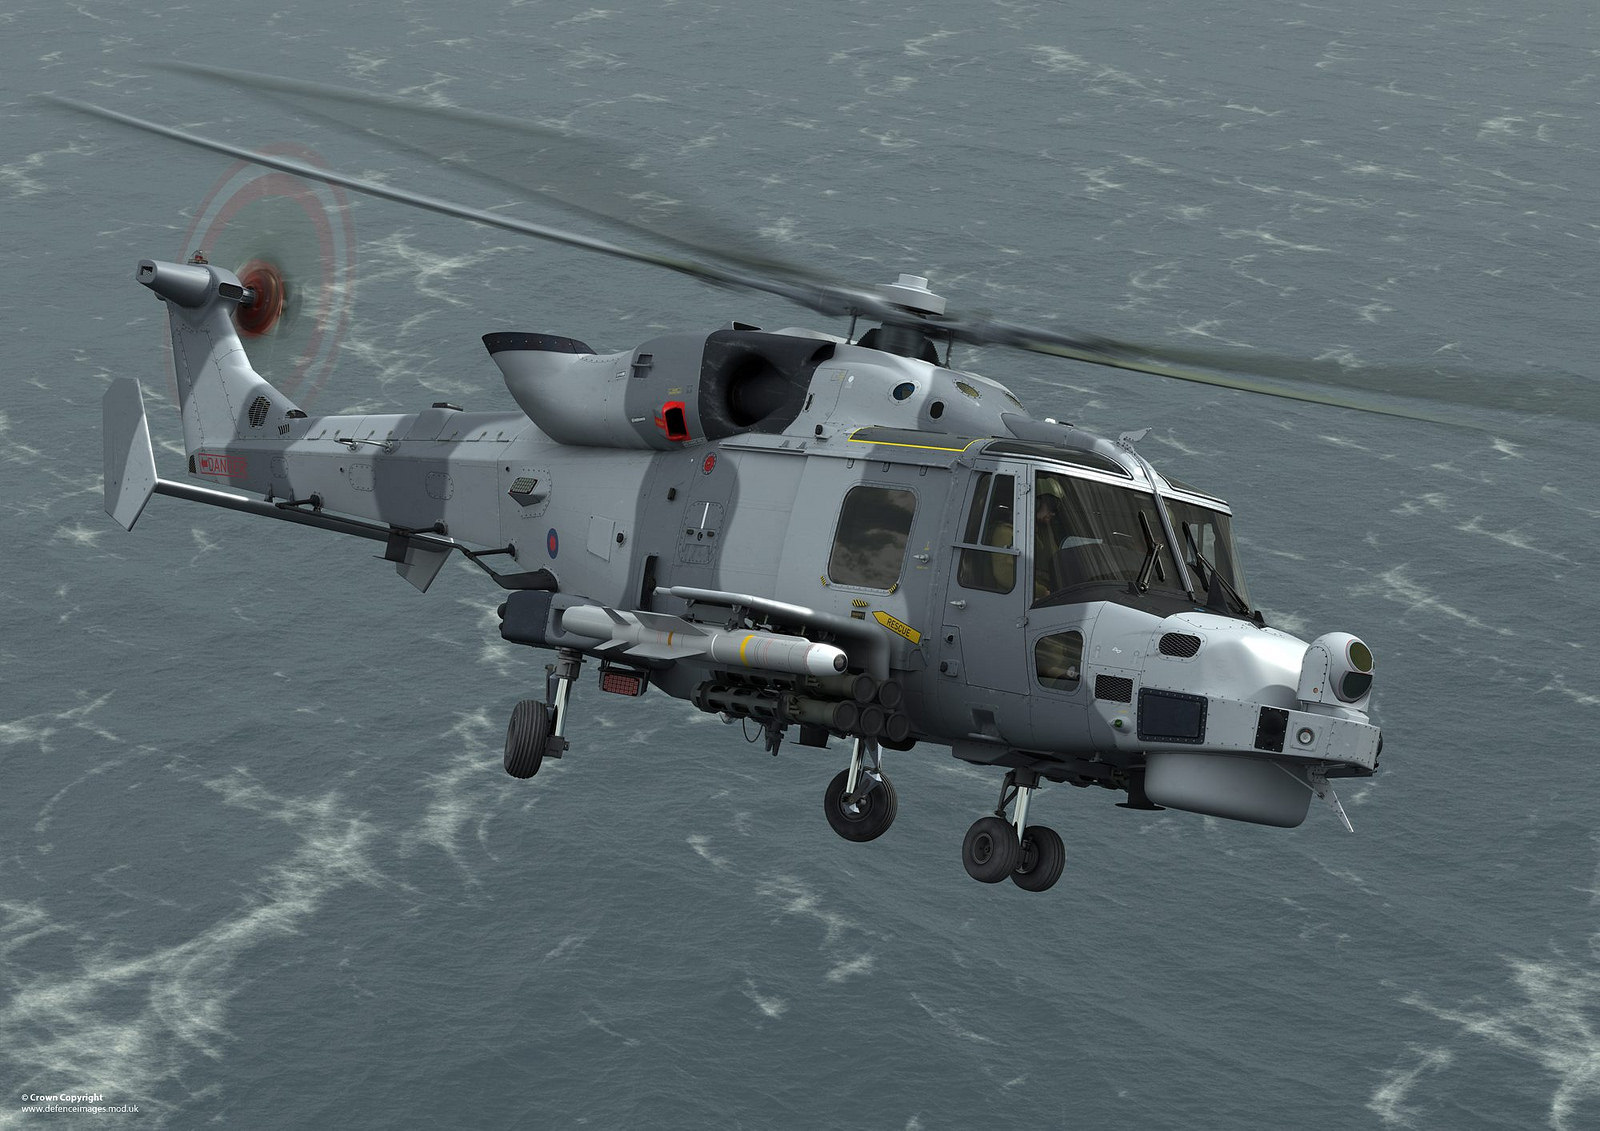 Wildcat-helicopter-with-FAGHWH-and-FASGWL-Missiles.jpg